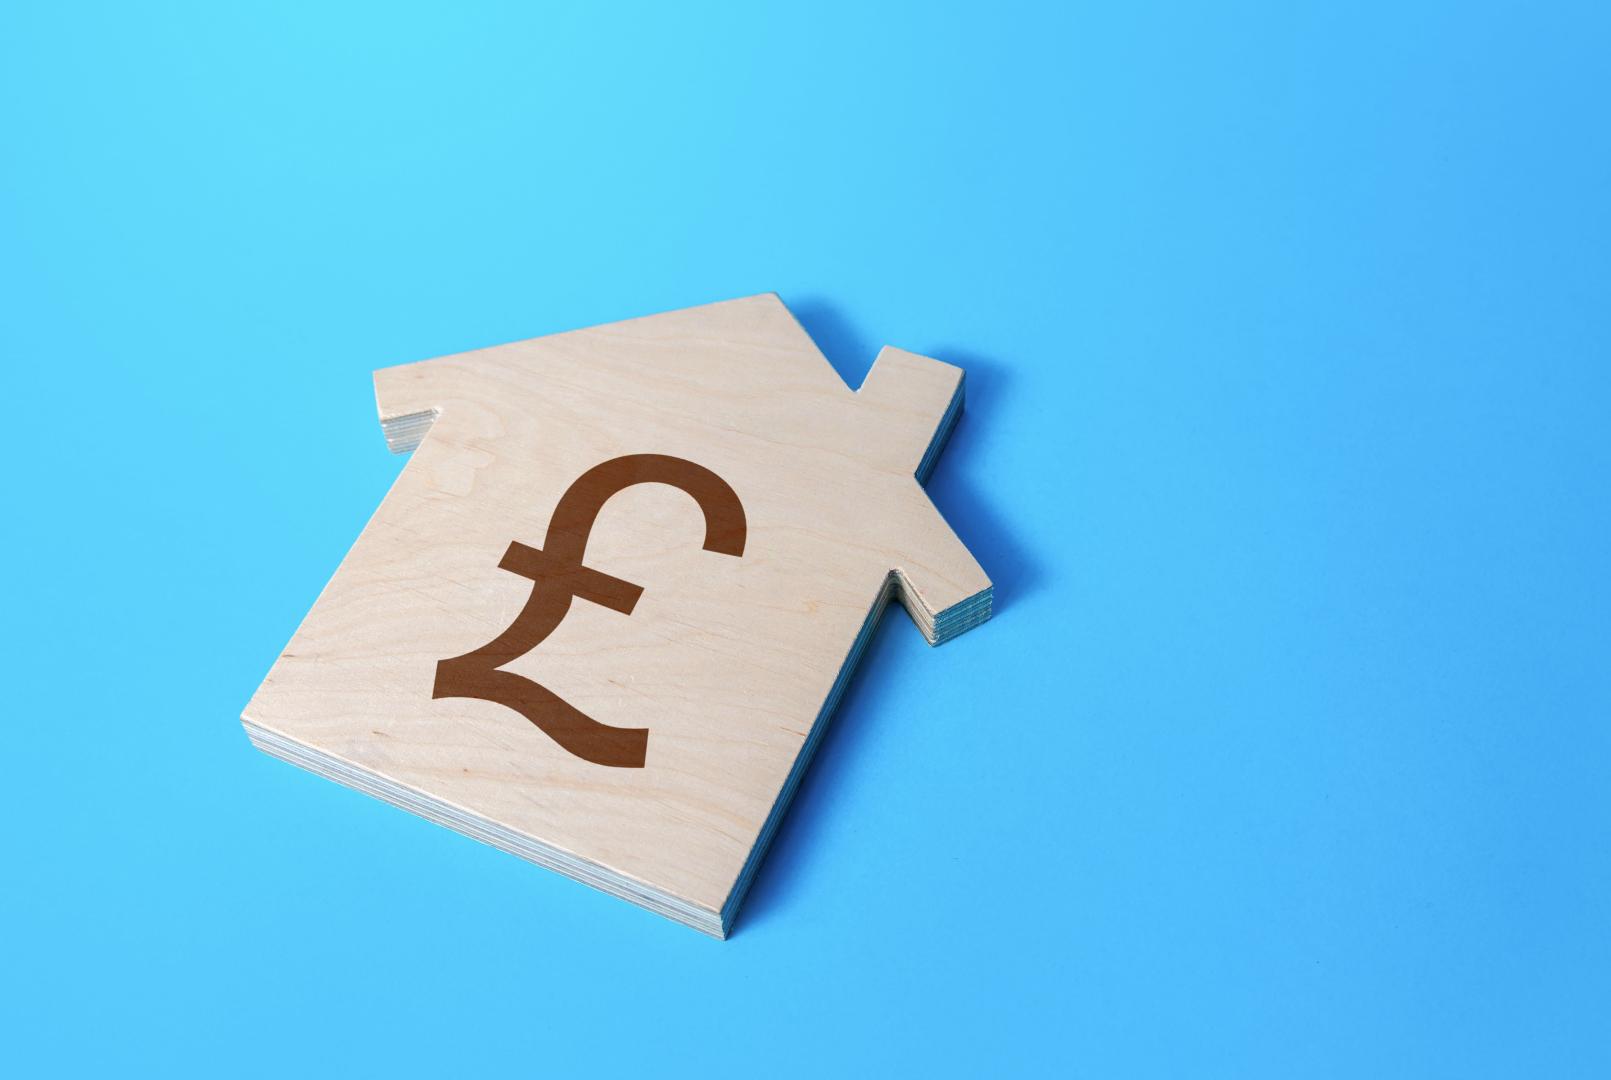 Wooden house with pound sign, on a blue background